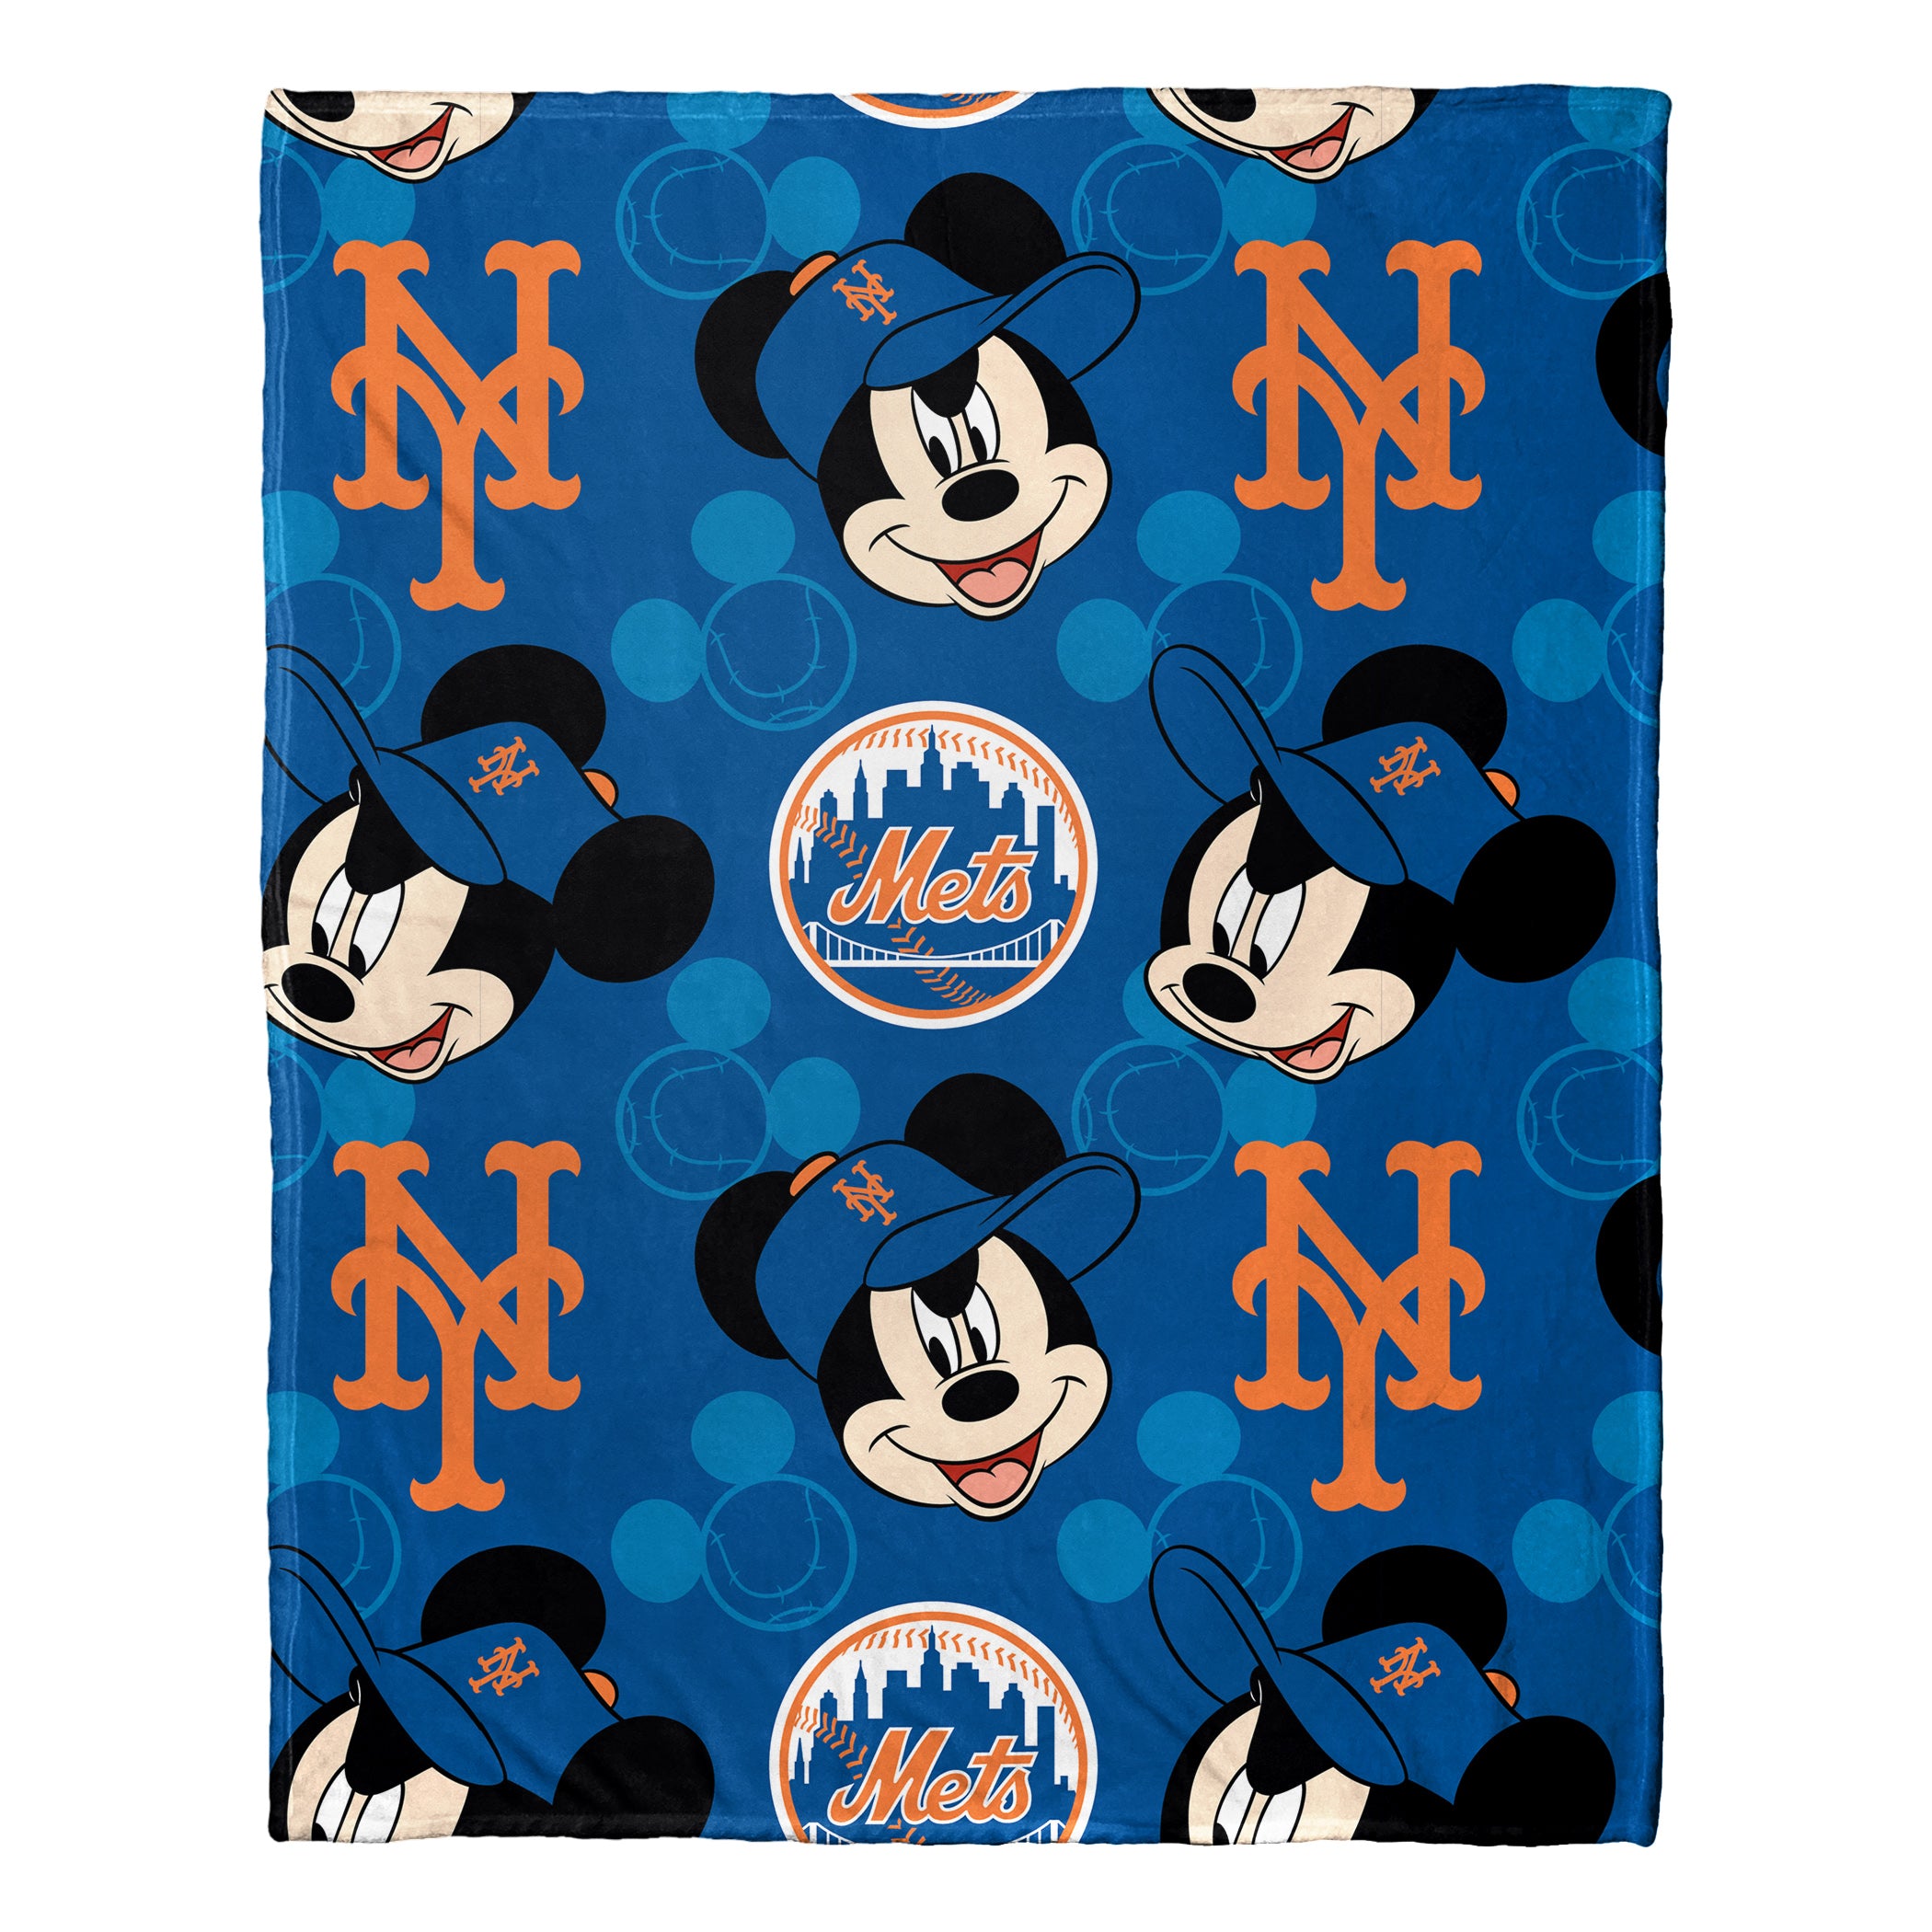 MLB New York Mets Pitch Crazy Mickey Hugger Pillow & Silk Touch Throw Blanket Set 40x50 Inches